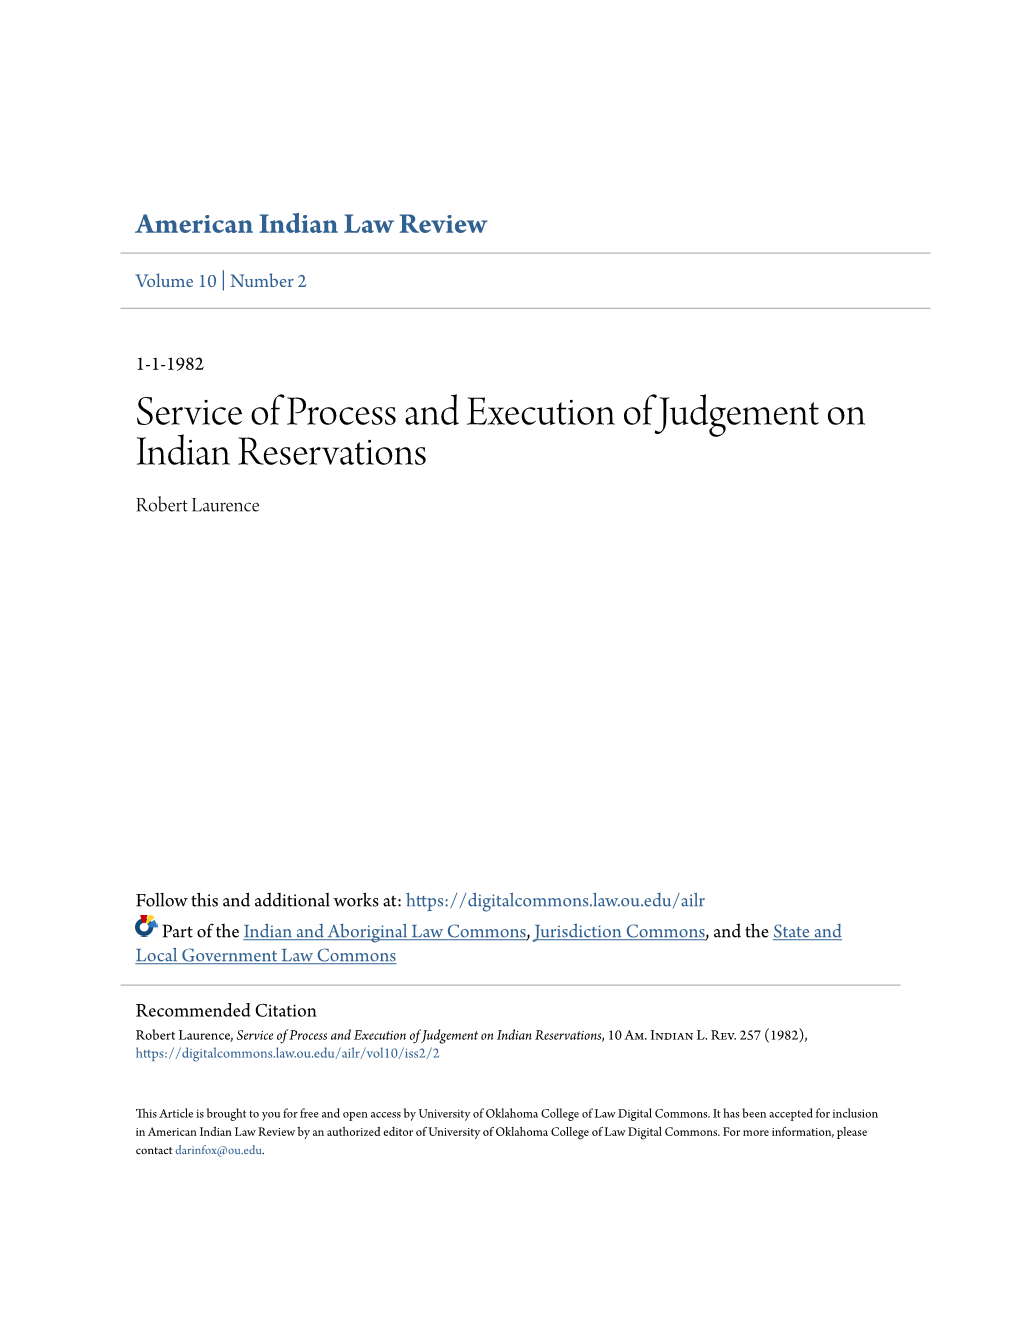 Service of Process and Execution of Judgement on Indian Reservations Robert Laurence